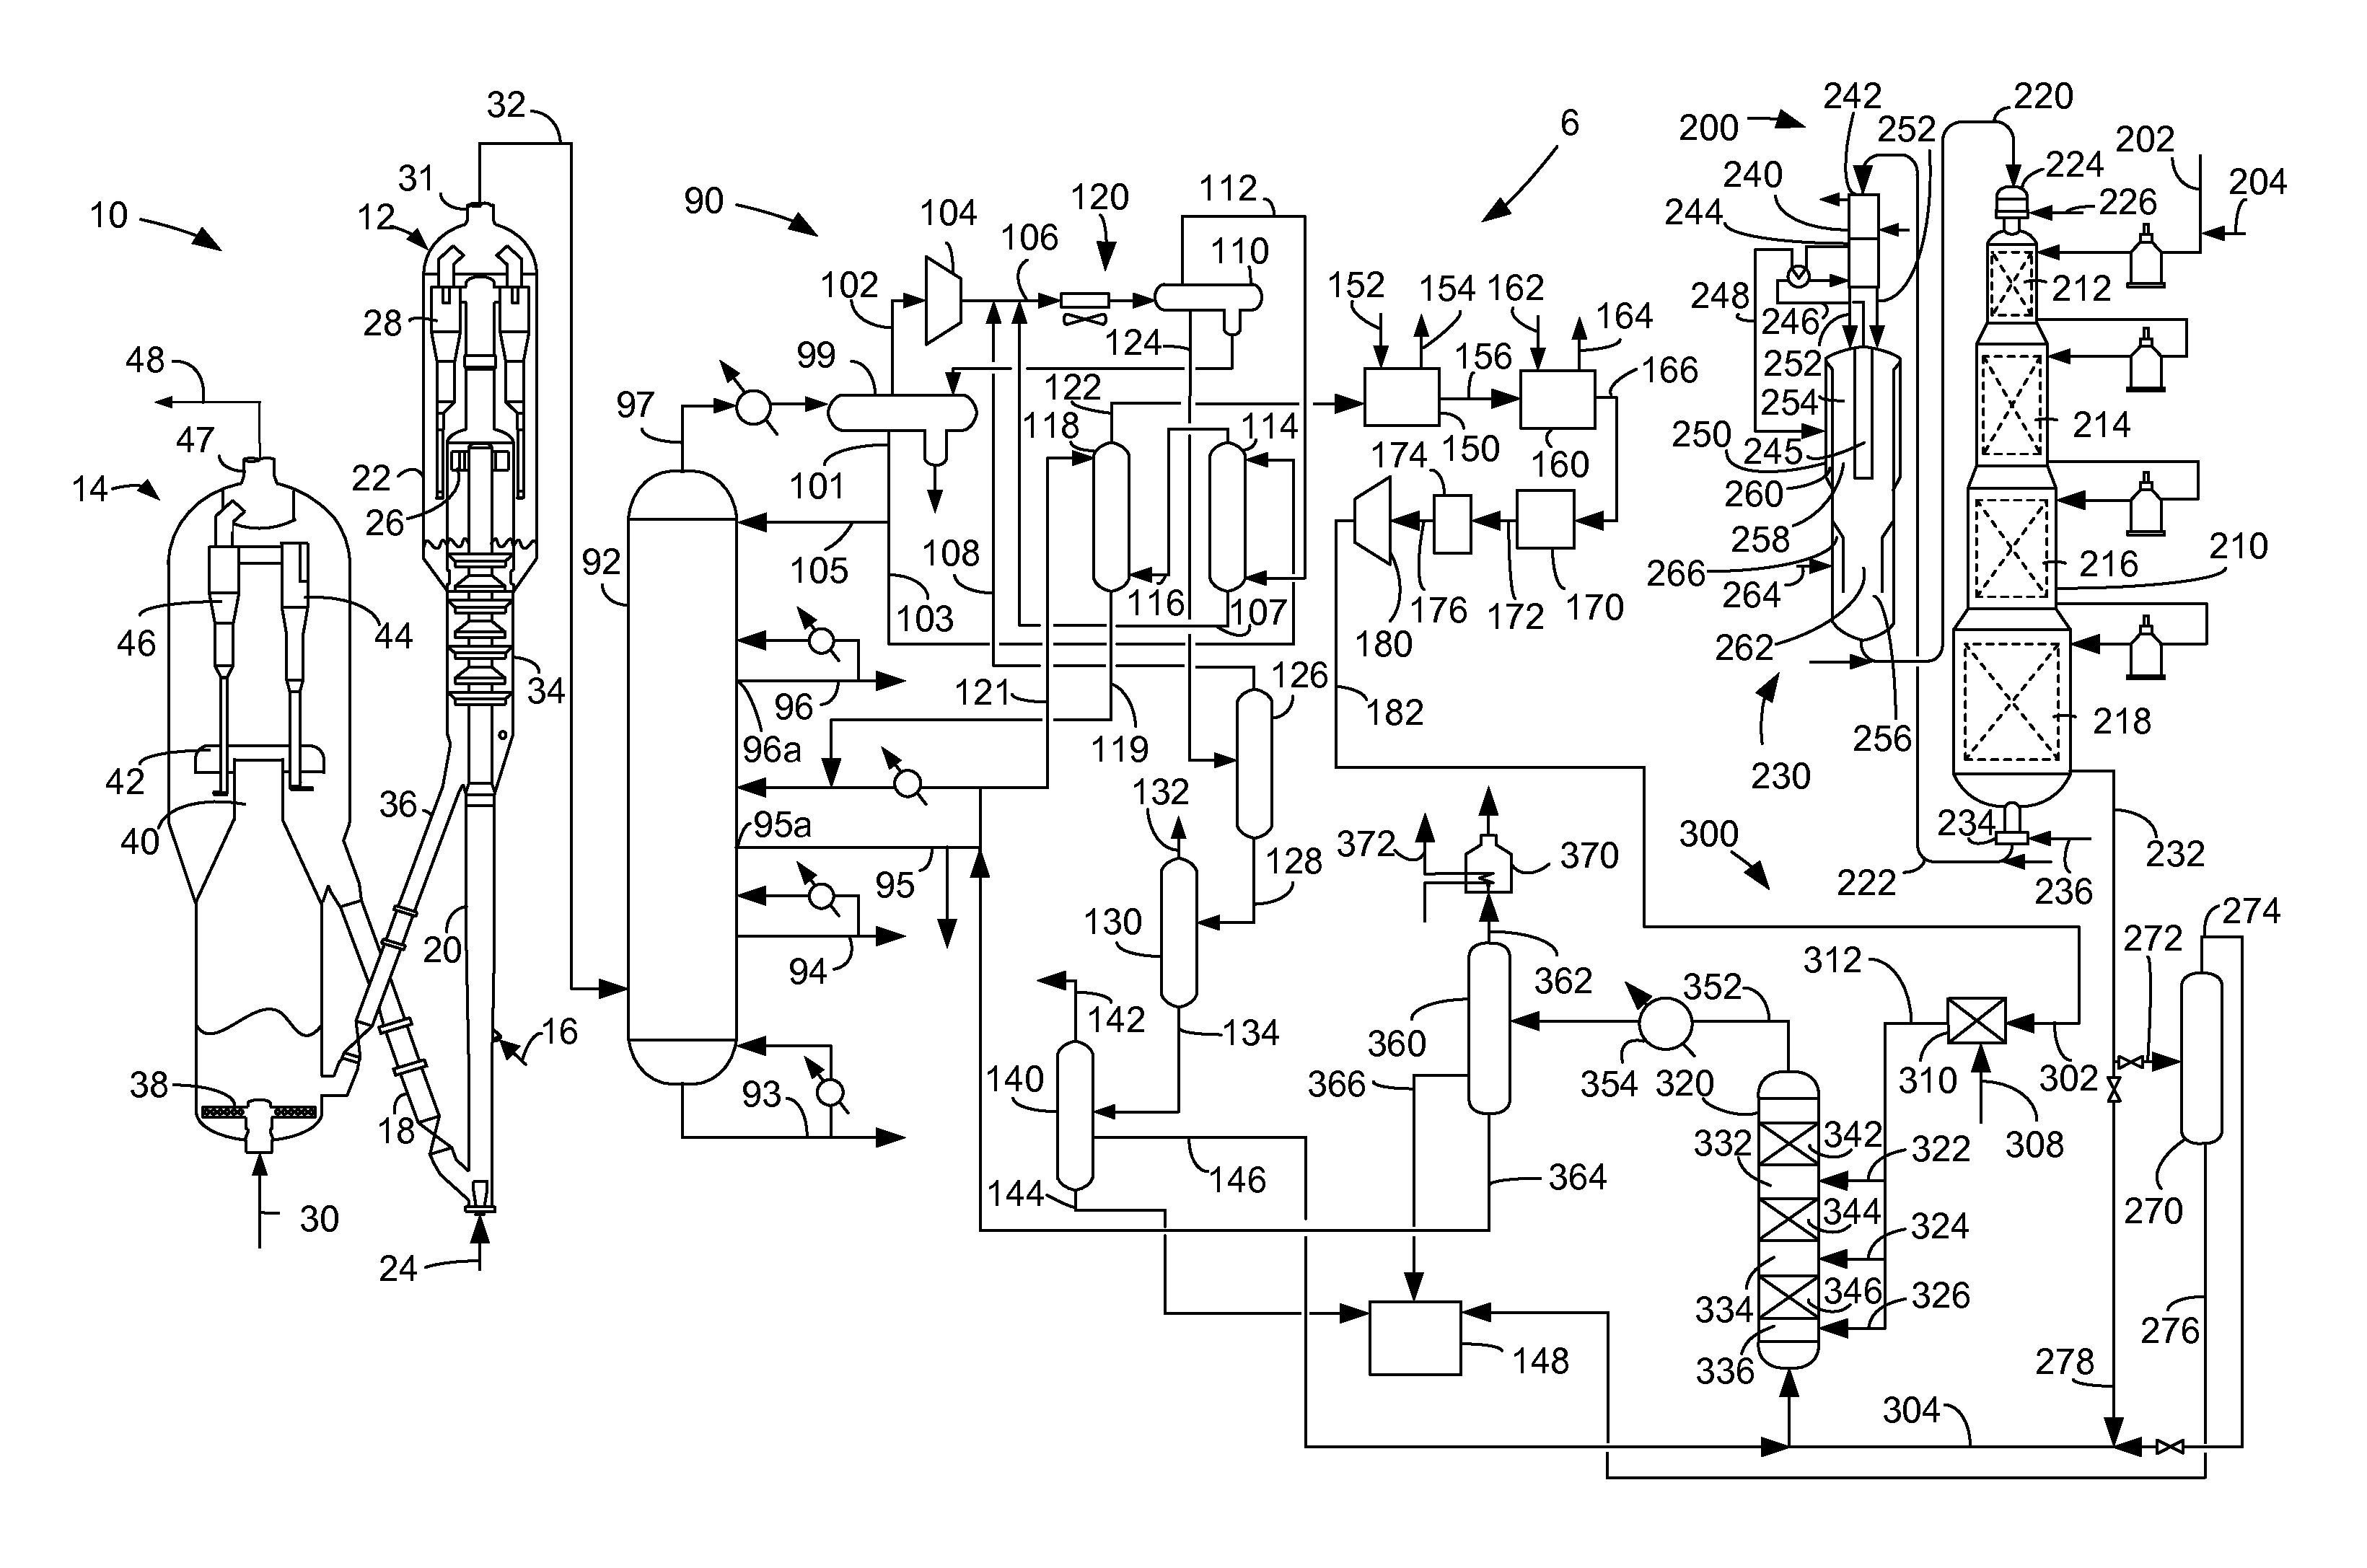 Apparatus for the reduction of gasoline benzene content by alkylation with dilute ethylene